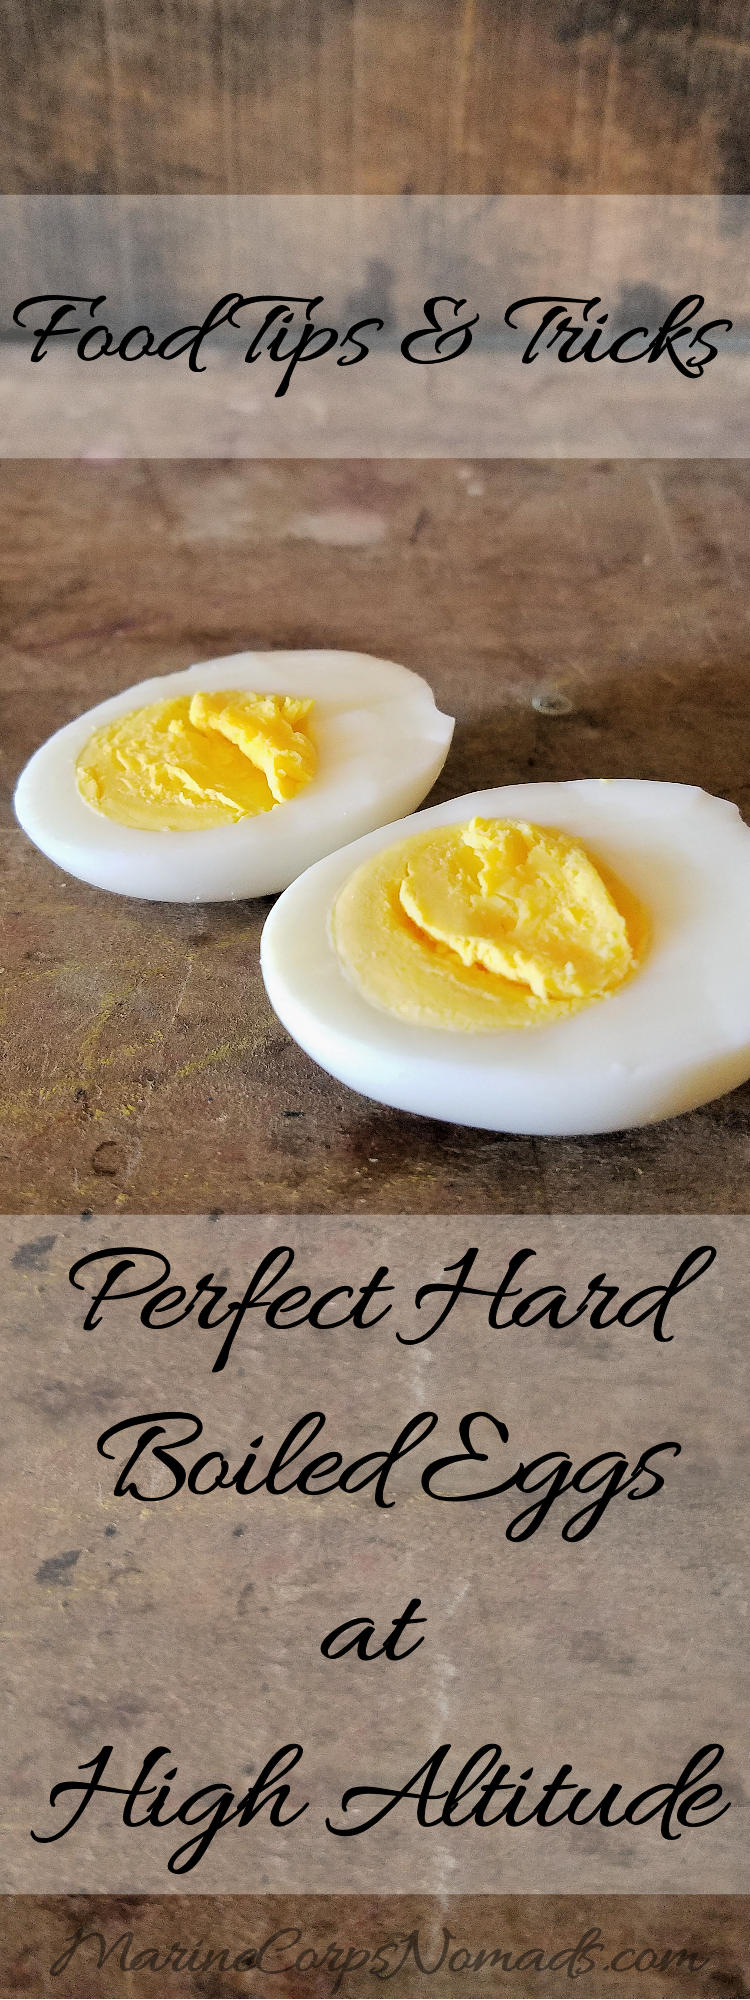 How to Make Perfect Hard Boiled Eggs at High Altitude | Food Tips & Tricks | Marine Corps Nomads